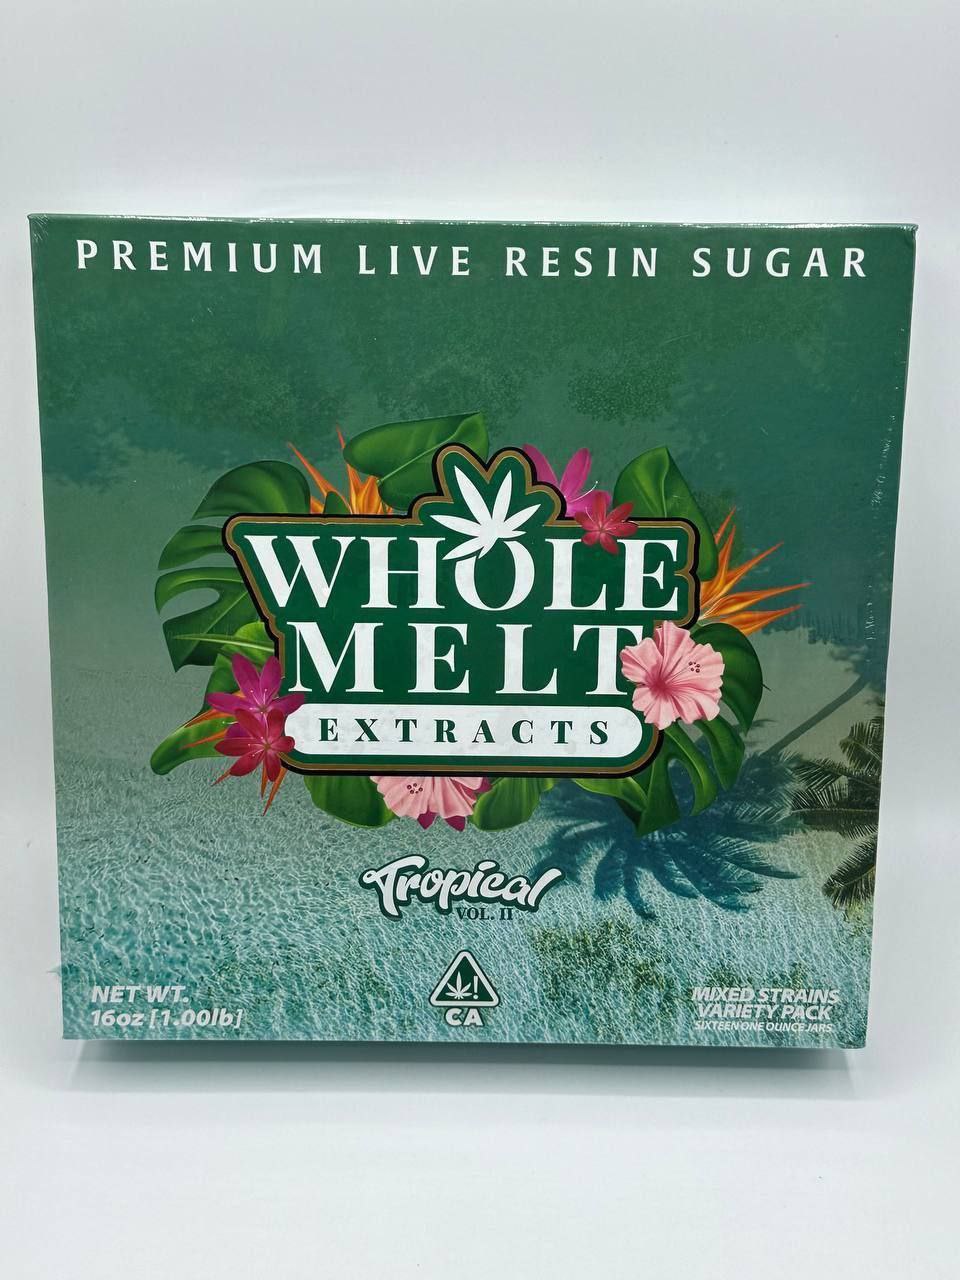 A green package labeled "Import placeholder for 24" with a tropical design featuring leaves and flowers. The brand, "Whole Melt Extracts," is prominently displayed in the center. The bottom reads "Tropical 90s 2.1," "Net Wt 16oz (1.00lb)," and "Mixed Strains Variety Pack.